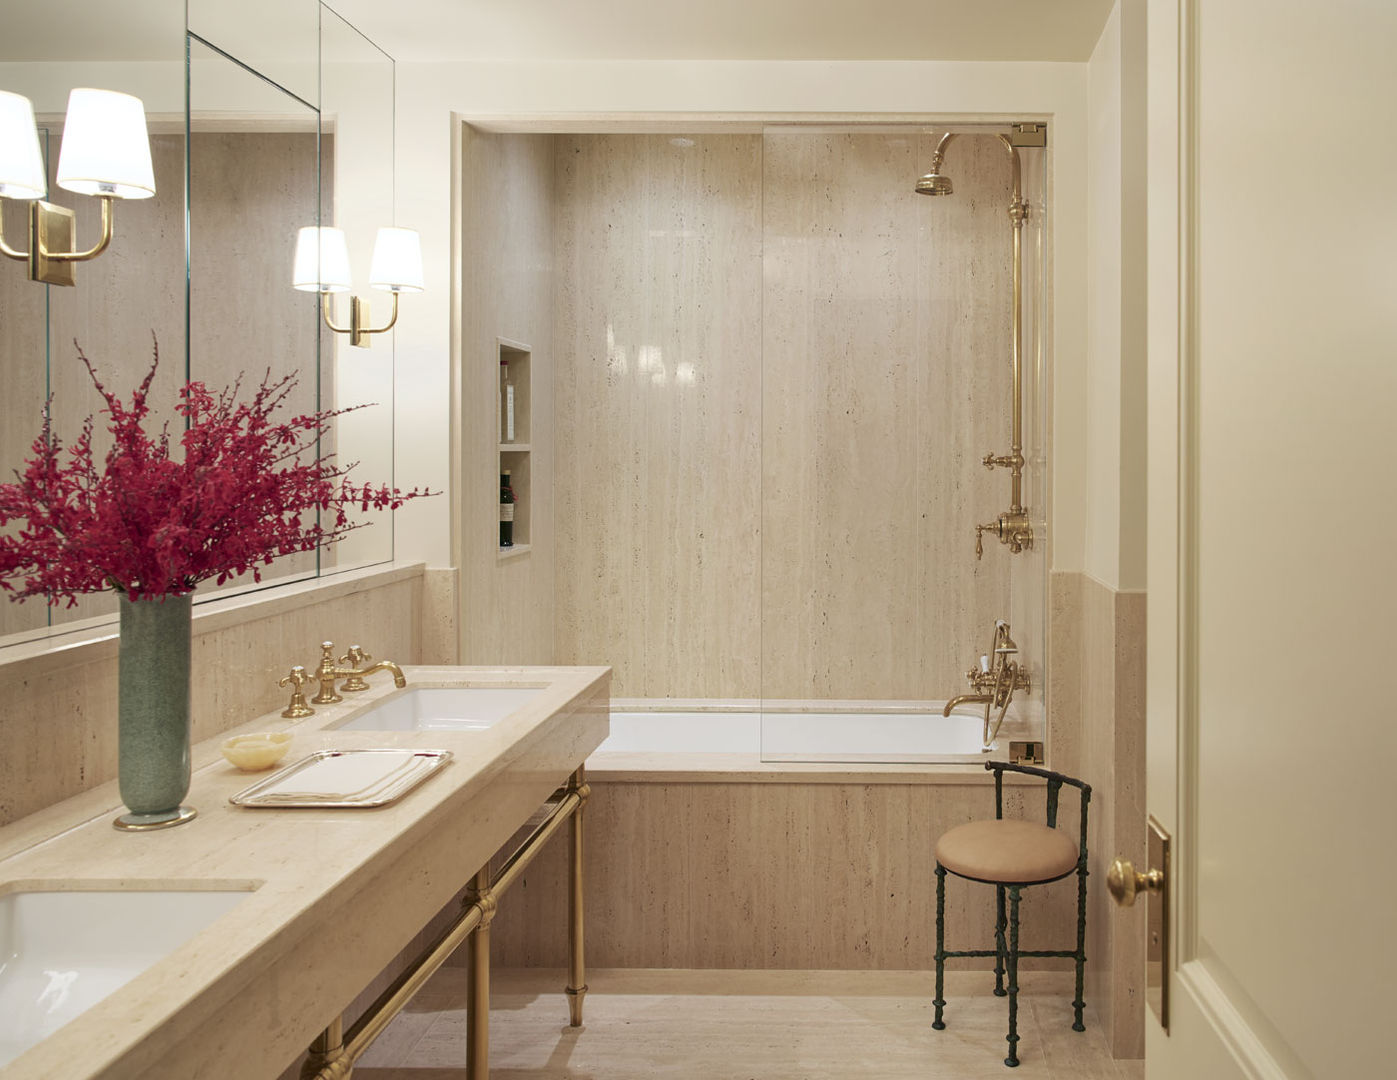 West Village Townhouse andretchelistcheffarchitects Classic style bathroom art deco,contemporary,manhattan,new york,townhouse,wood,marble,sophisticated